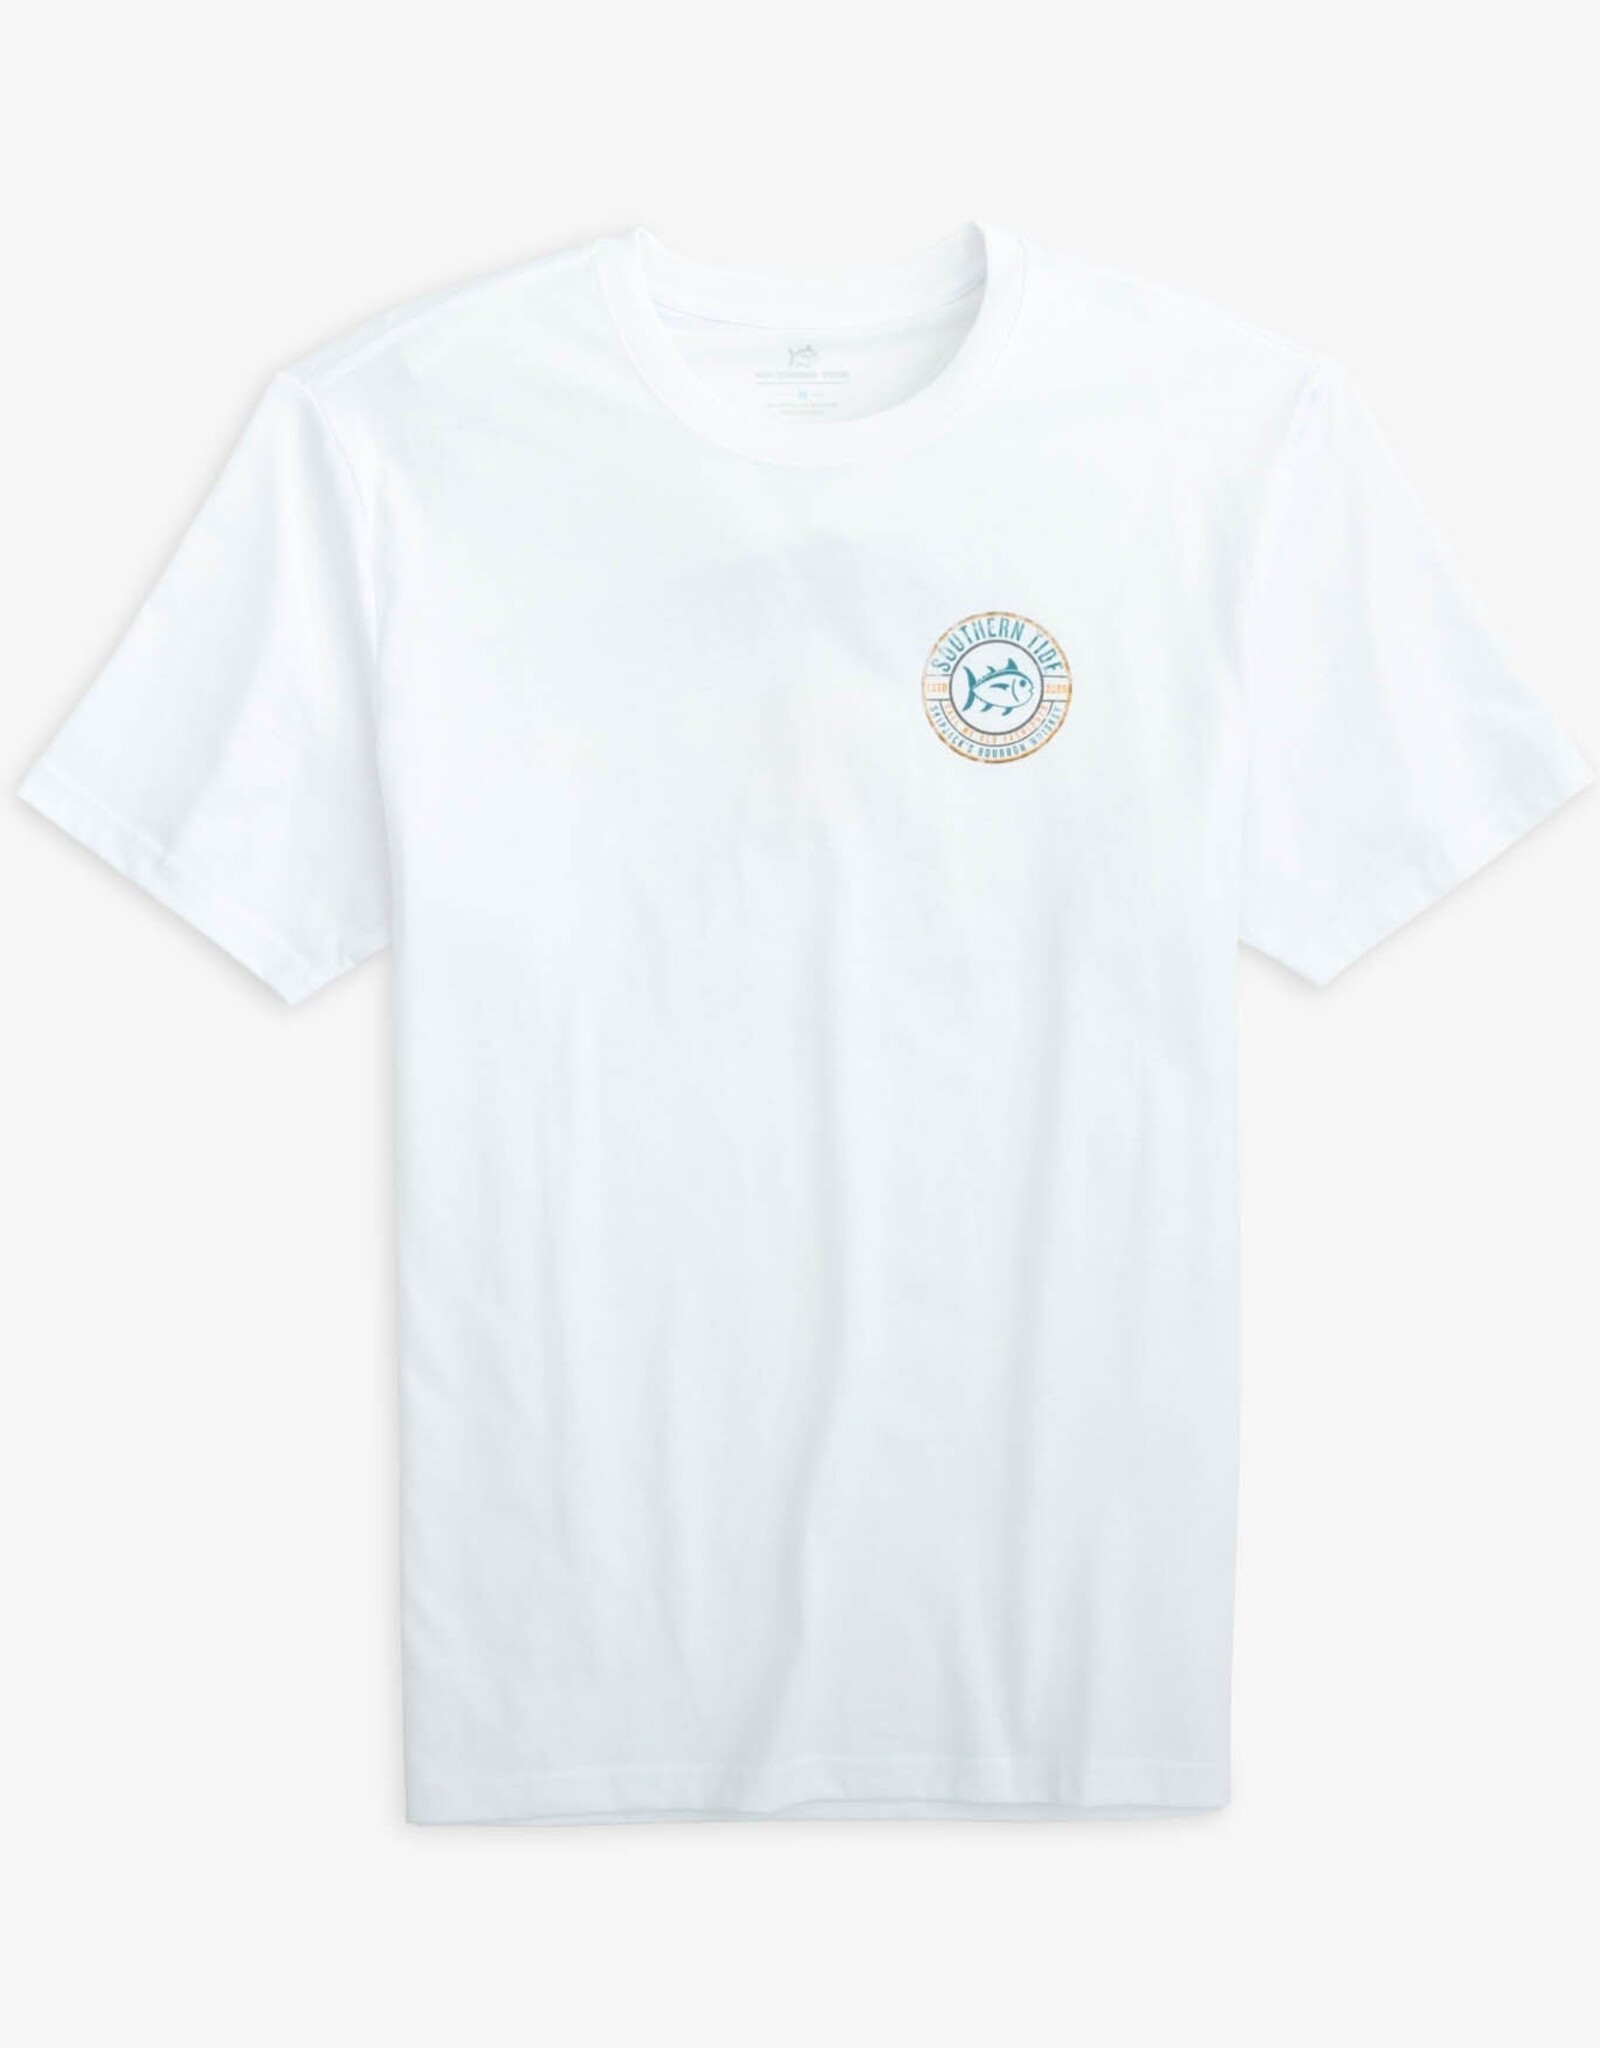 Southern Tide Call Me Old Fashioned Tee